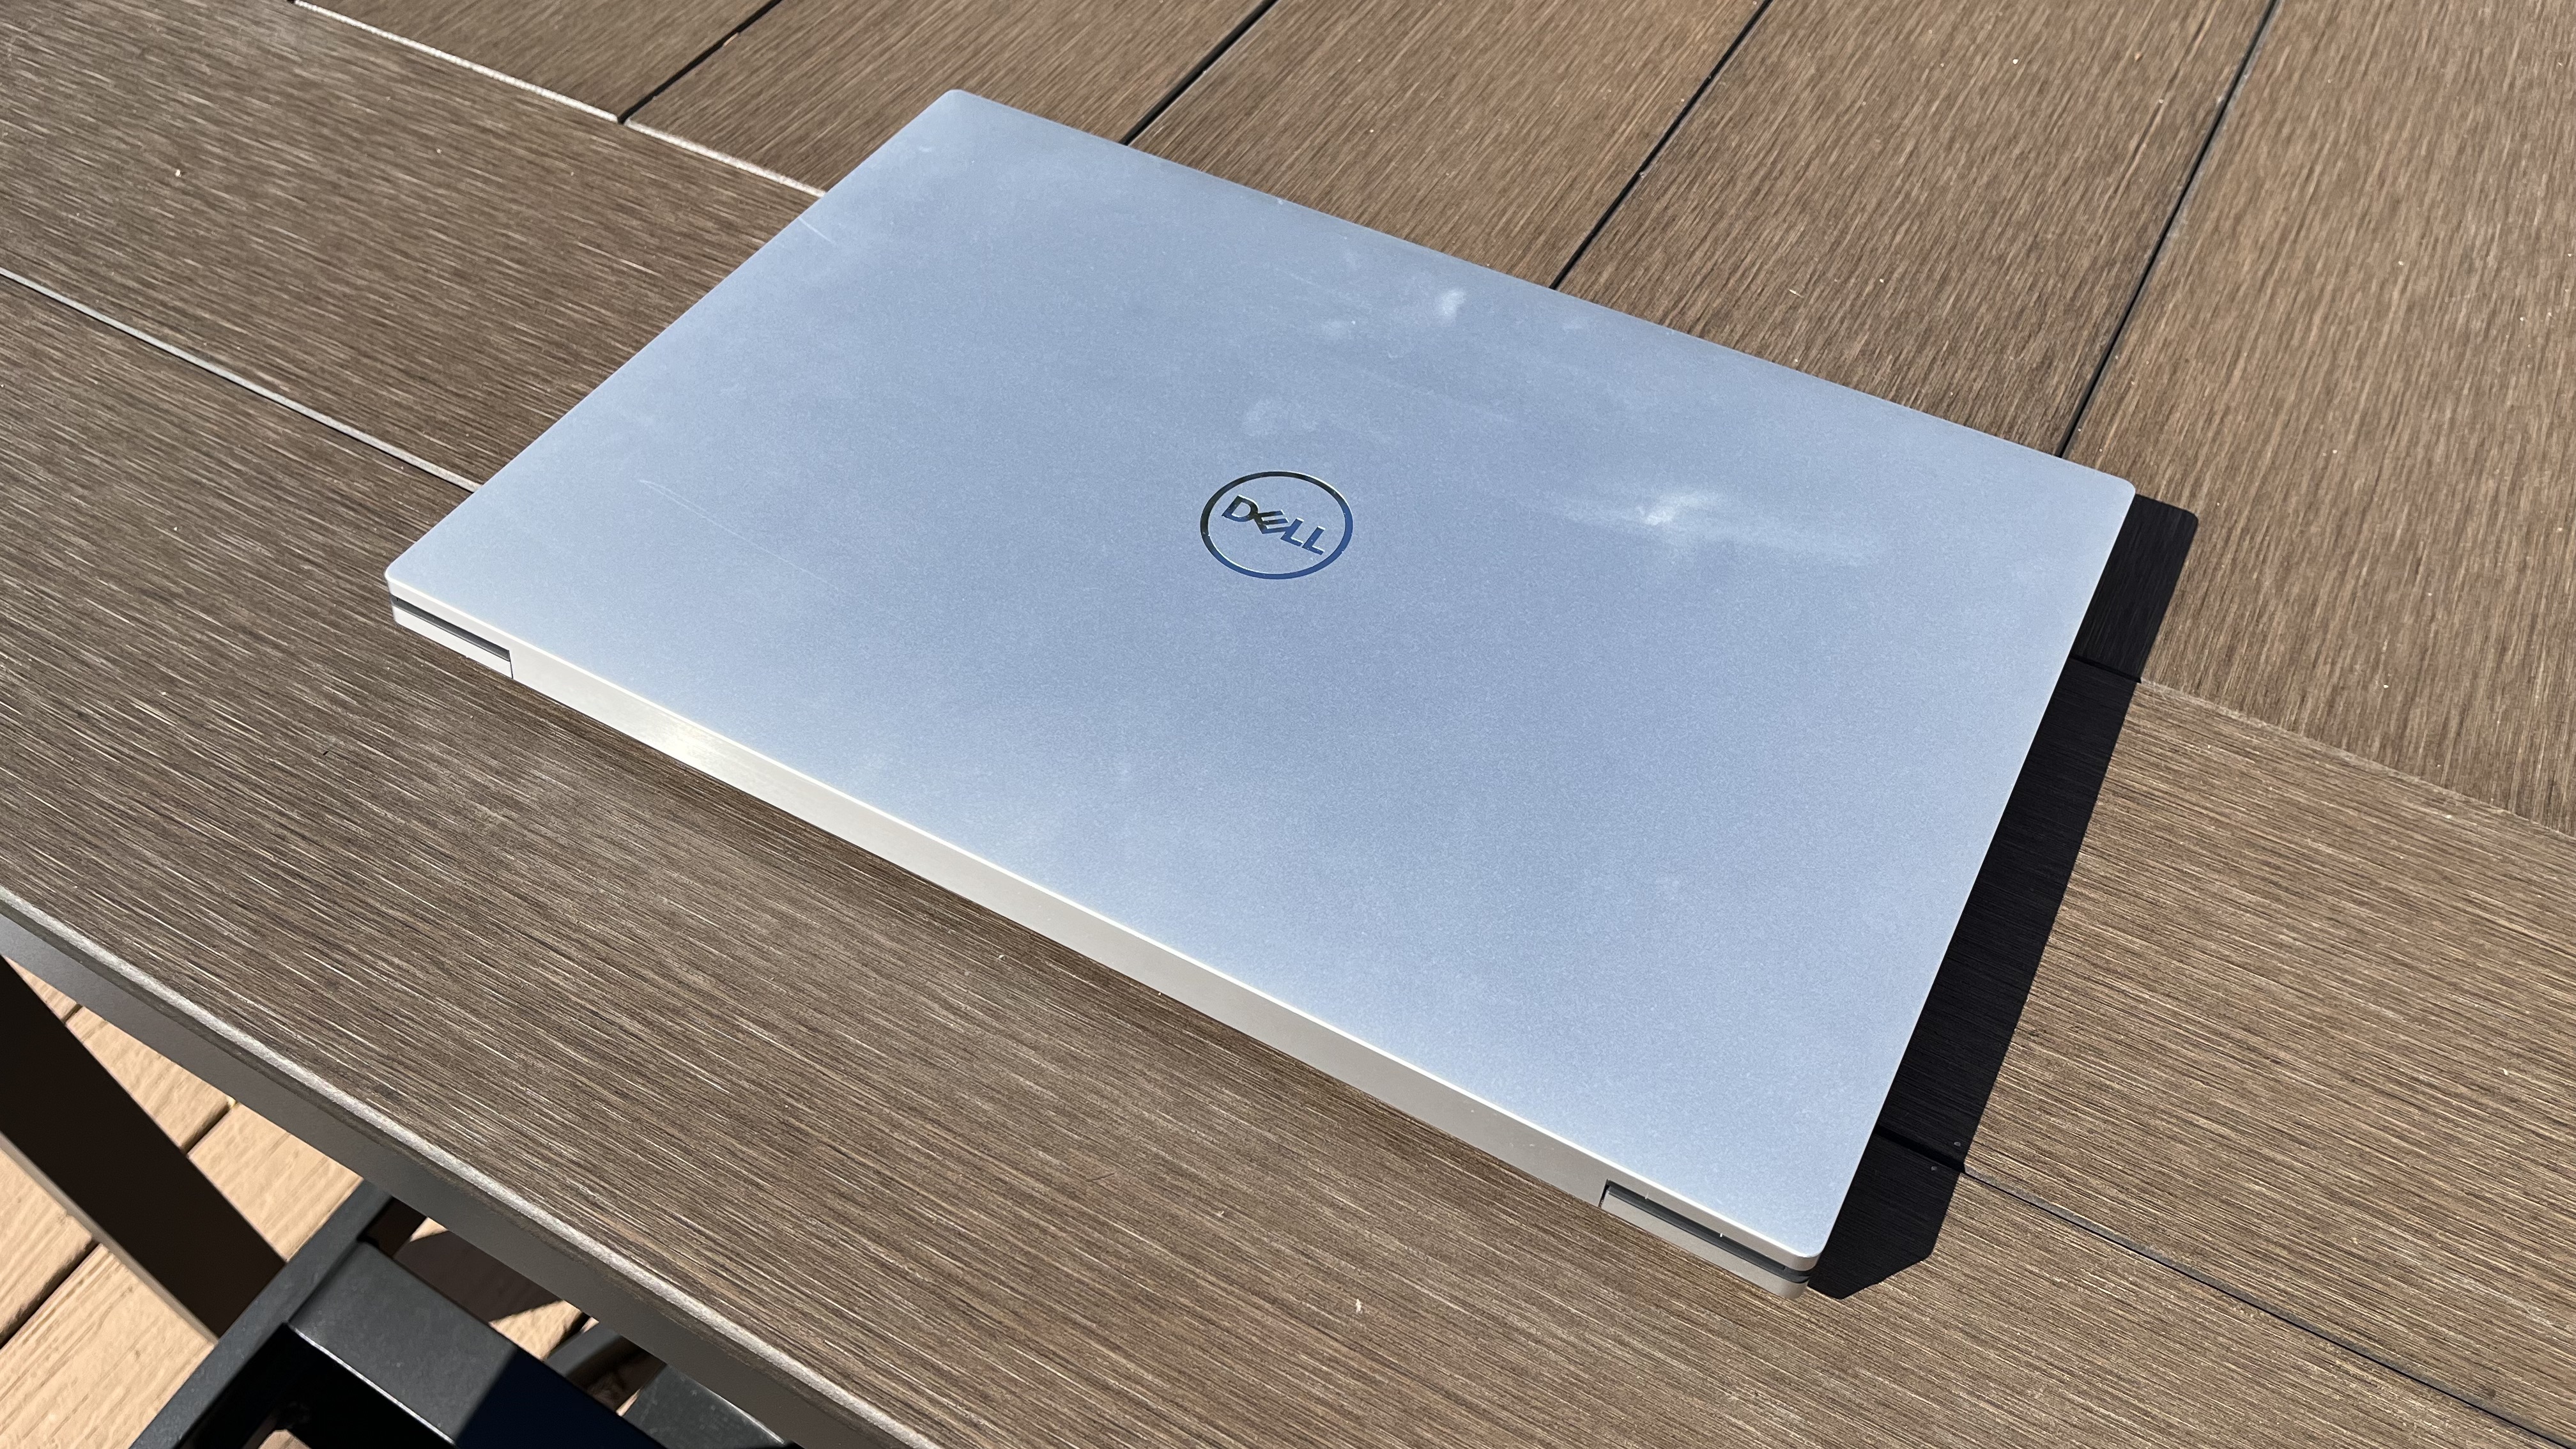 Dell XPS 17 laptop in use on a wooden desk